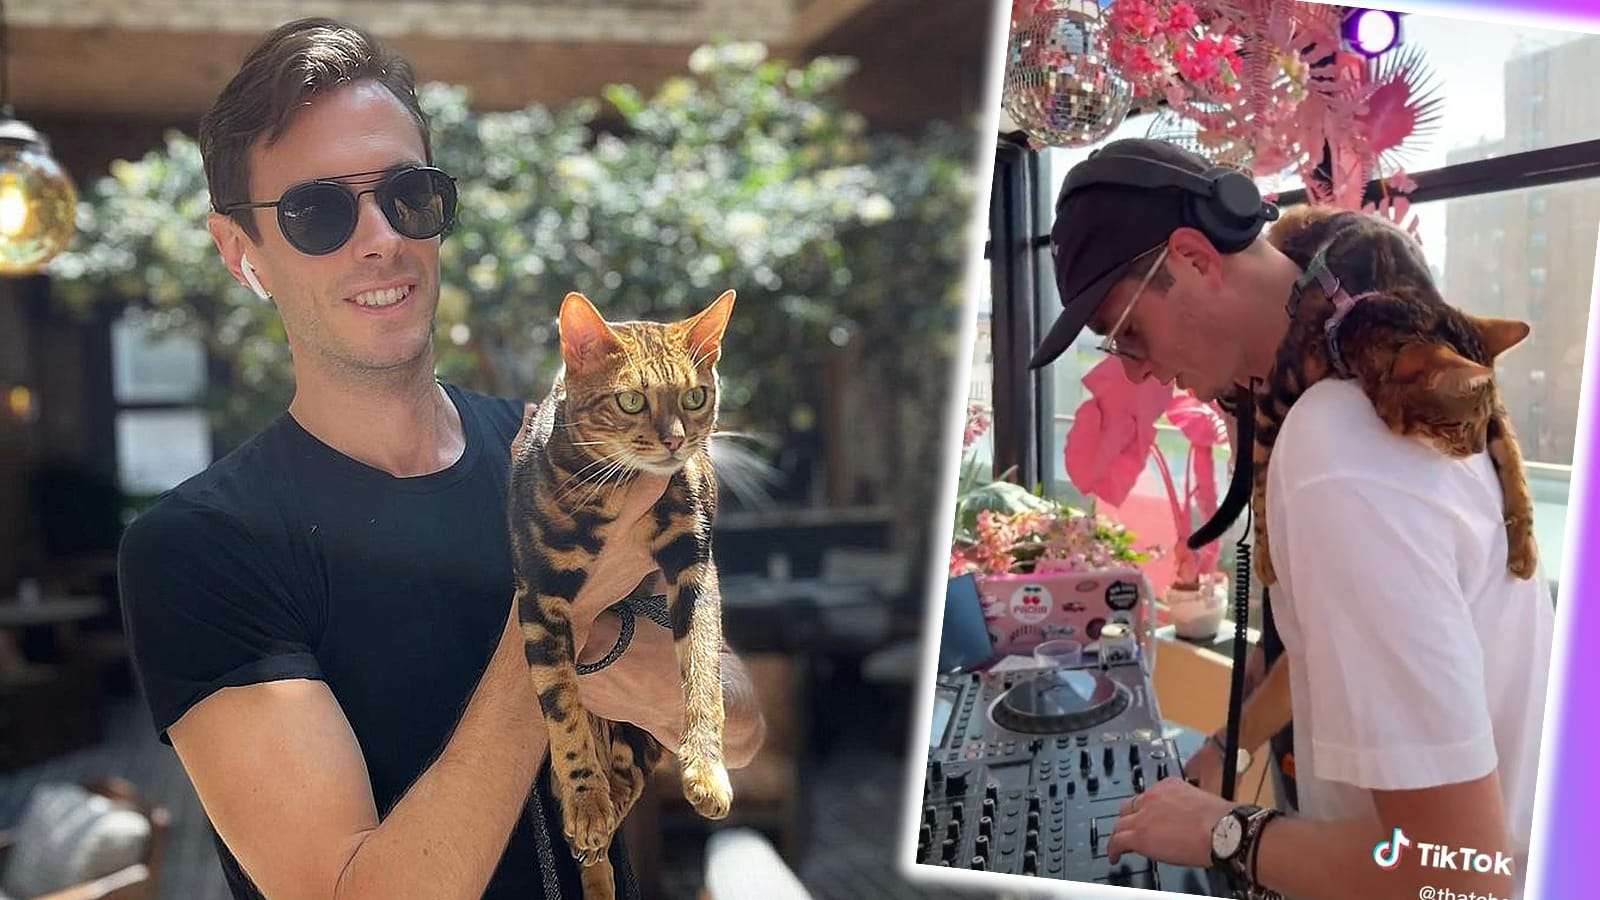 TikToker goes viral for playing DJ set with cat